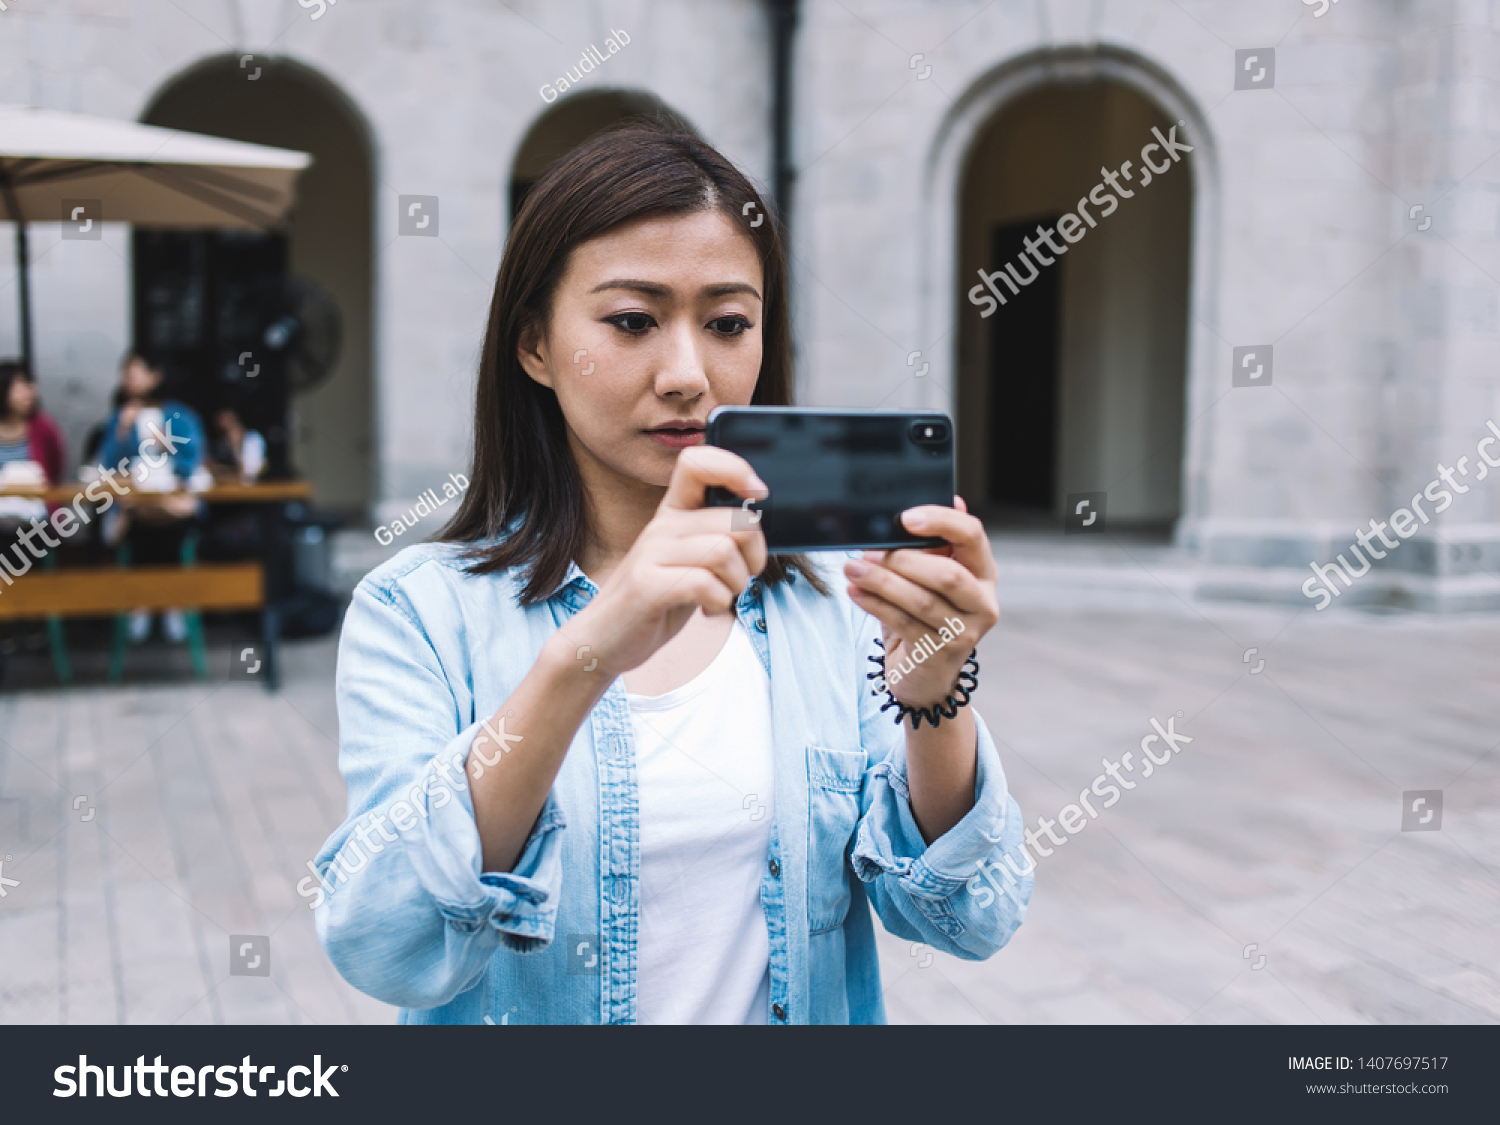 Attractive tourist taking pictures and shooting video on mobile phone for publication in internet networks via 4G internet standing in historic center with public wifi, Asian woman clicking images #1407697517